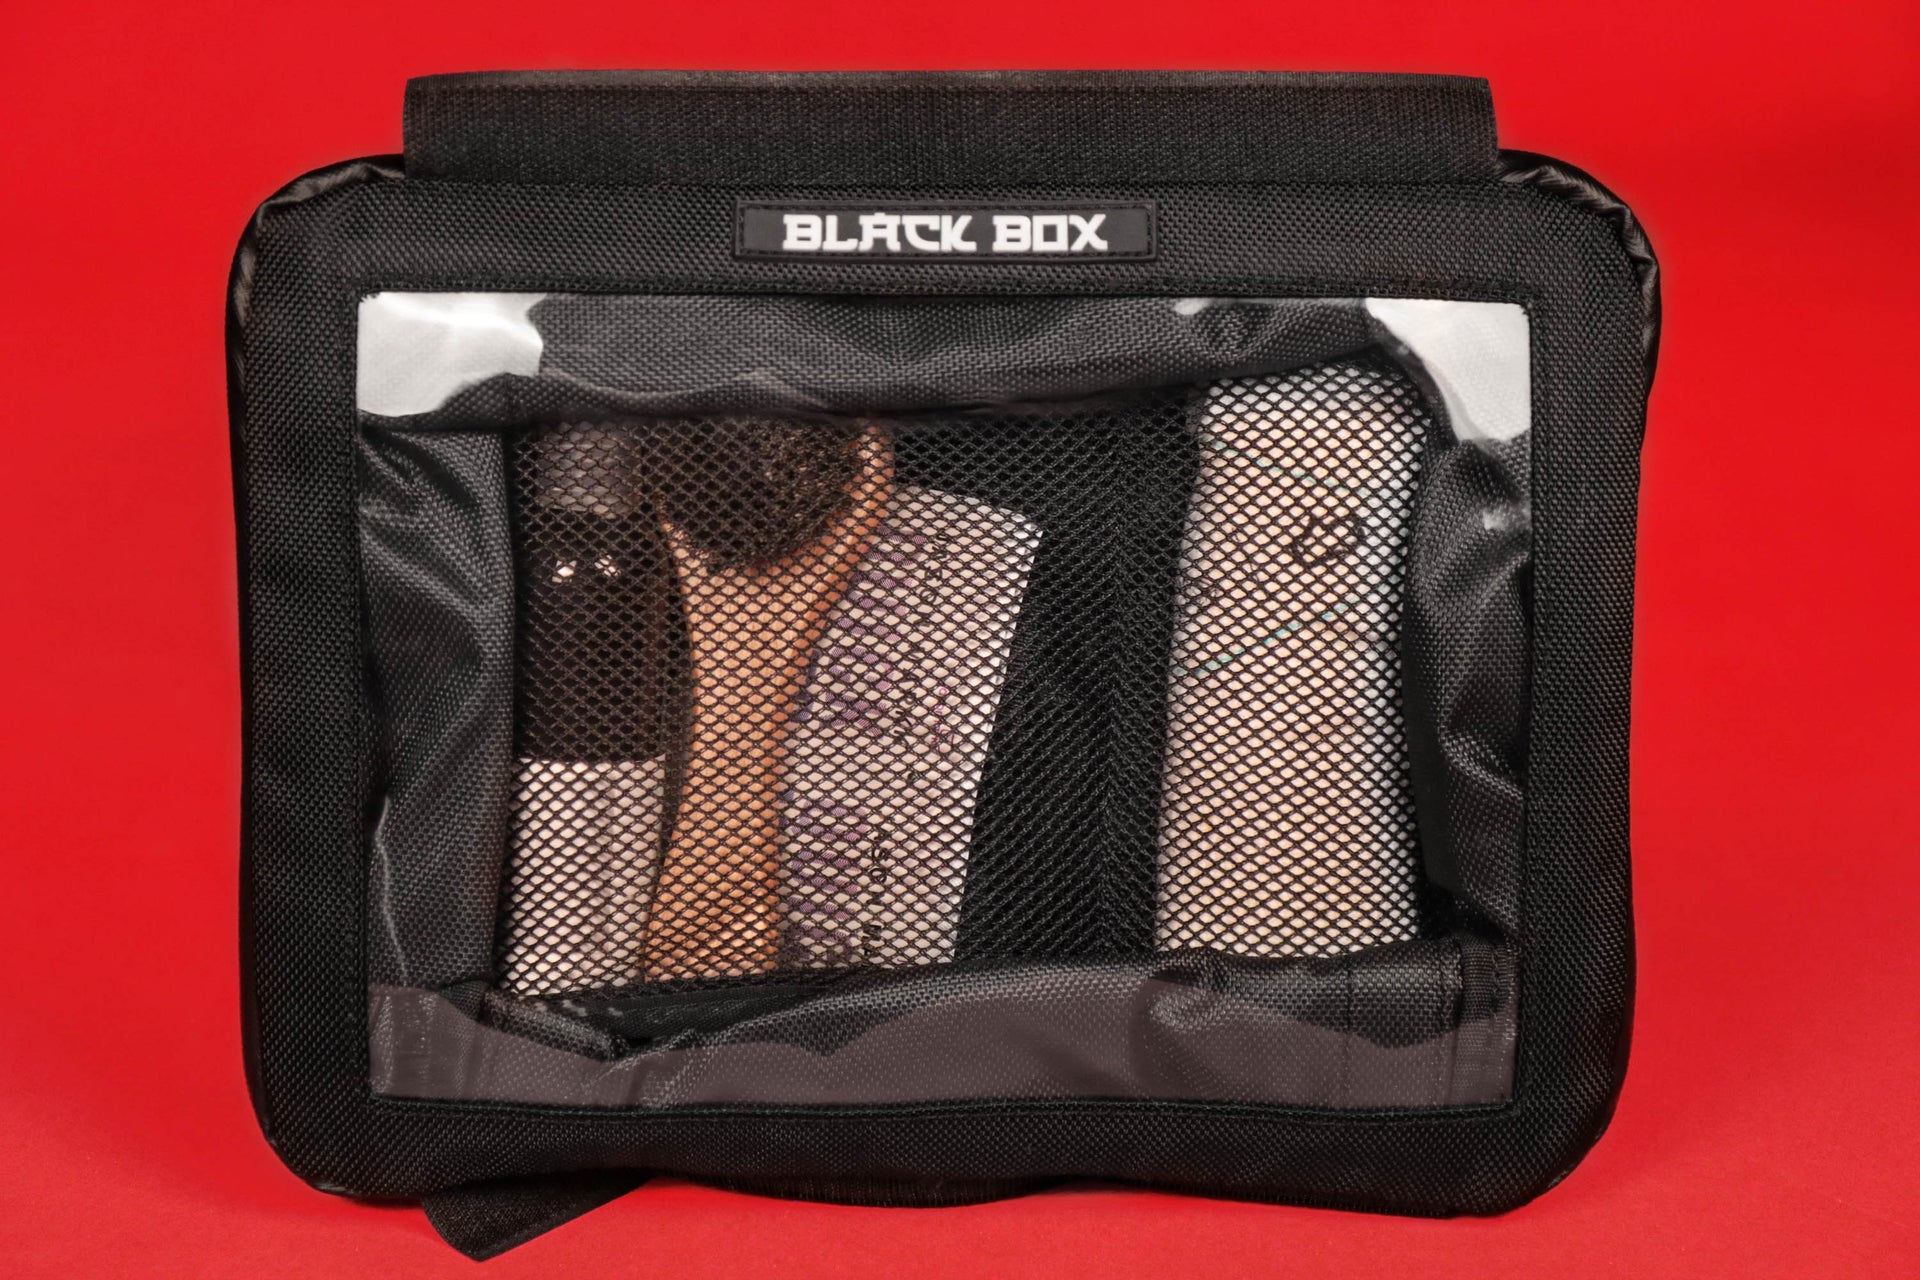 The Black Box Portable Hanging Sneaker Bag For Travel and Storage With Clear Window filled with sneaker cleaning items